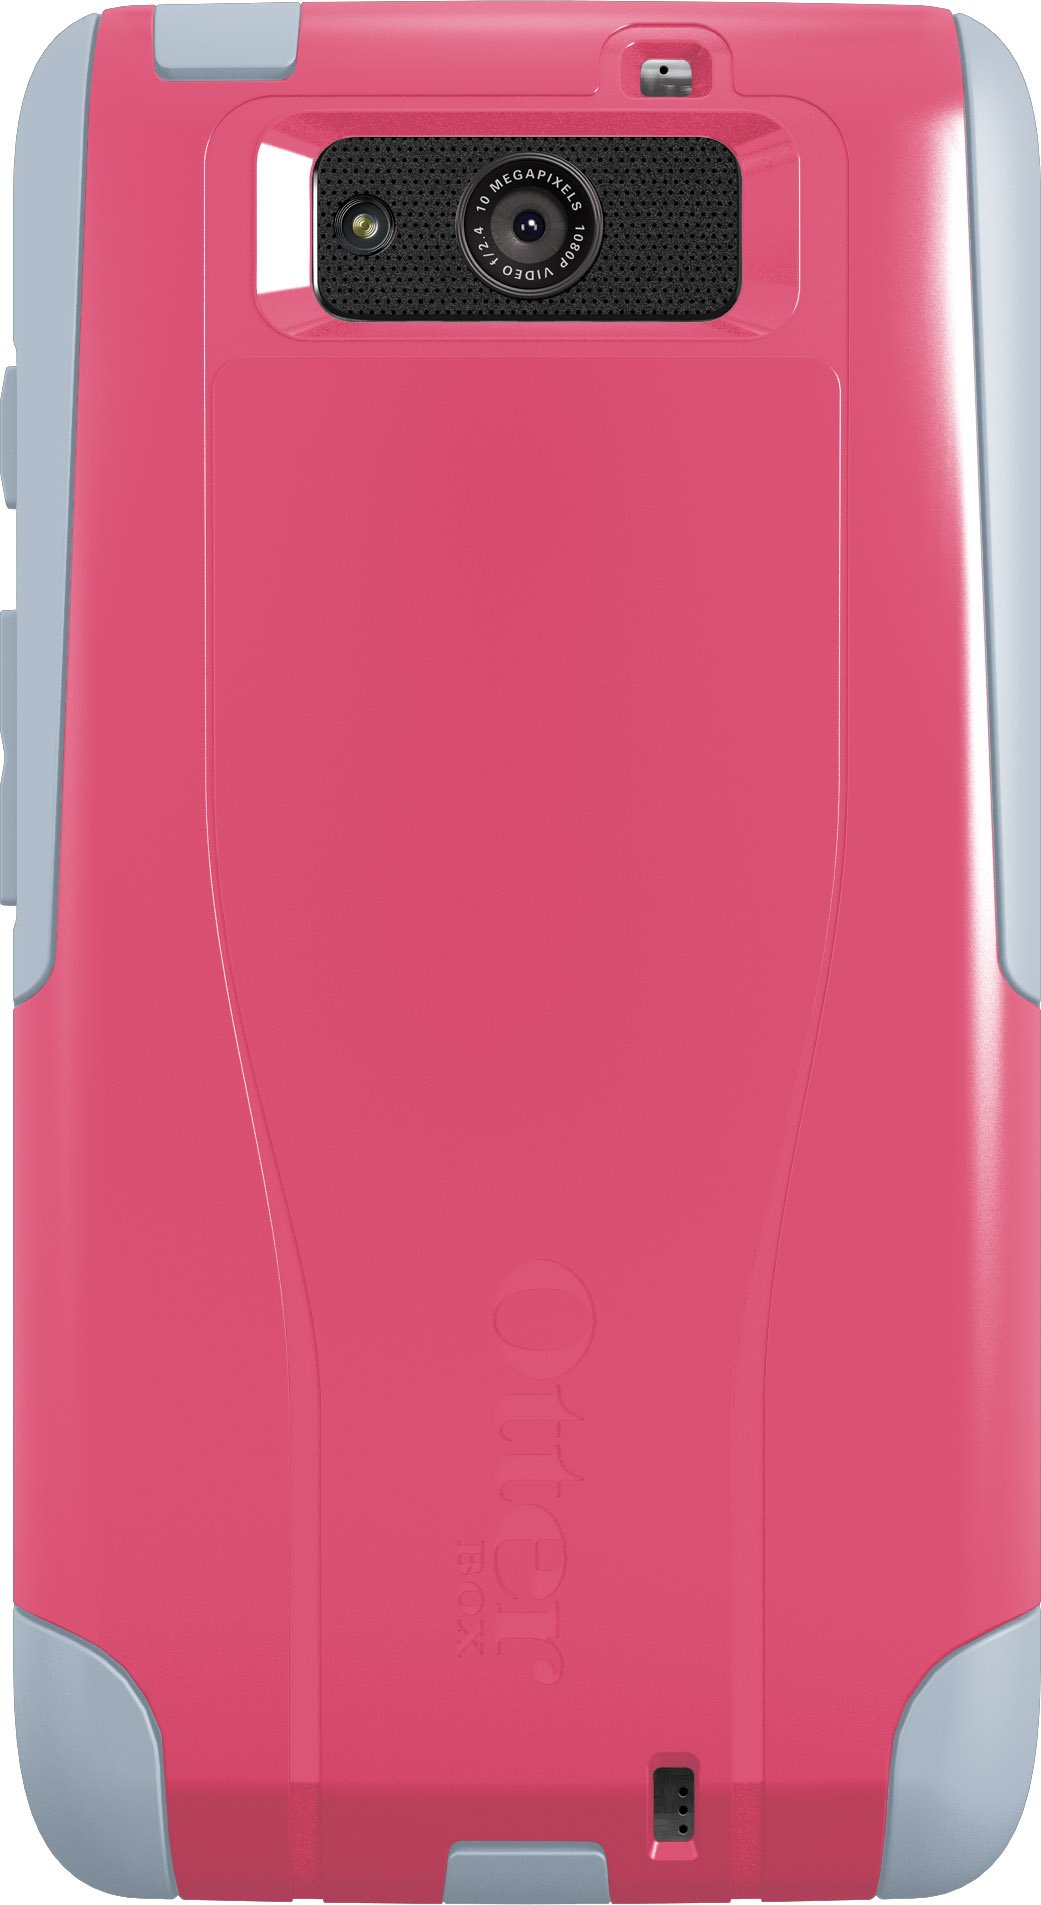 OTTERBOX COMMUTER SERIES Case for Motorola DROID Ultra - Retail Packaging - Pink/Gray